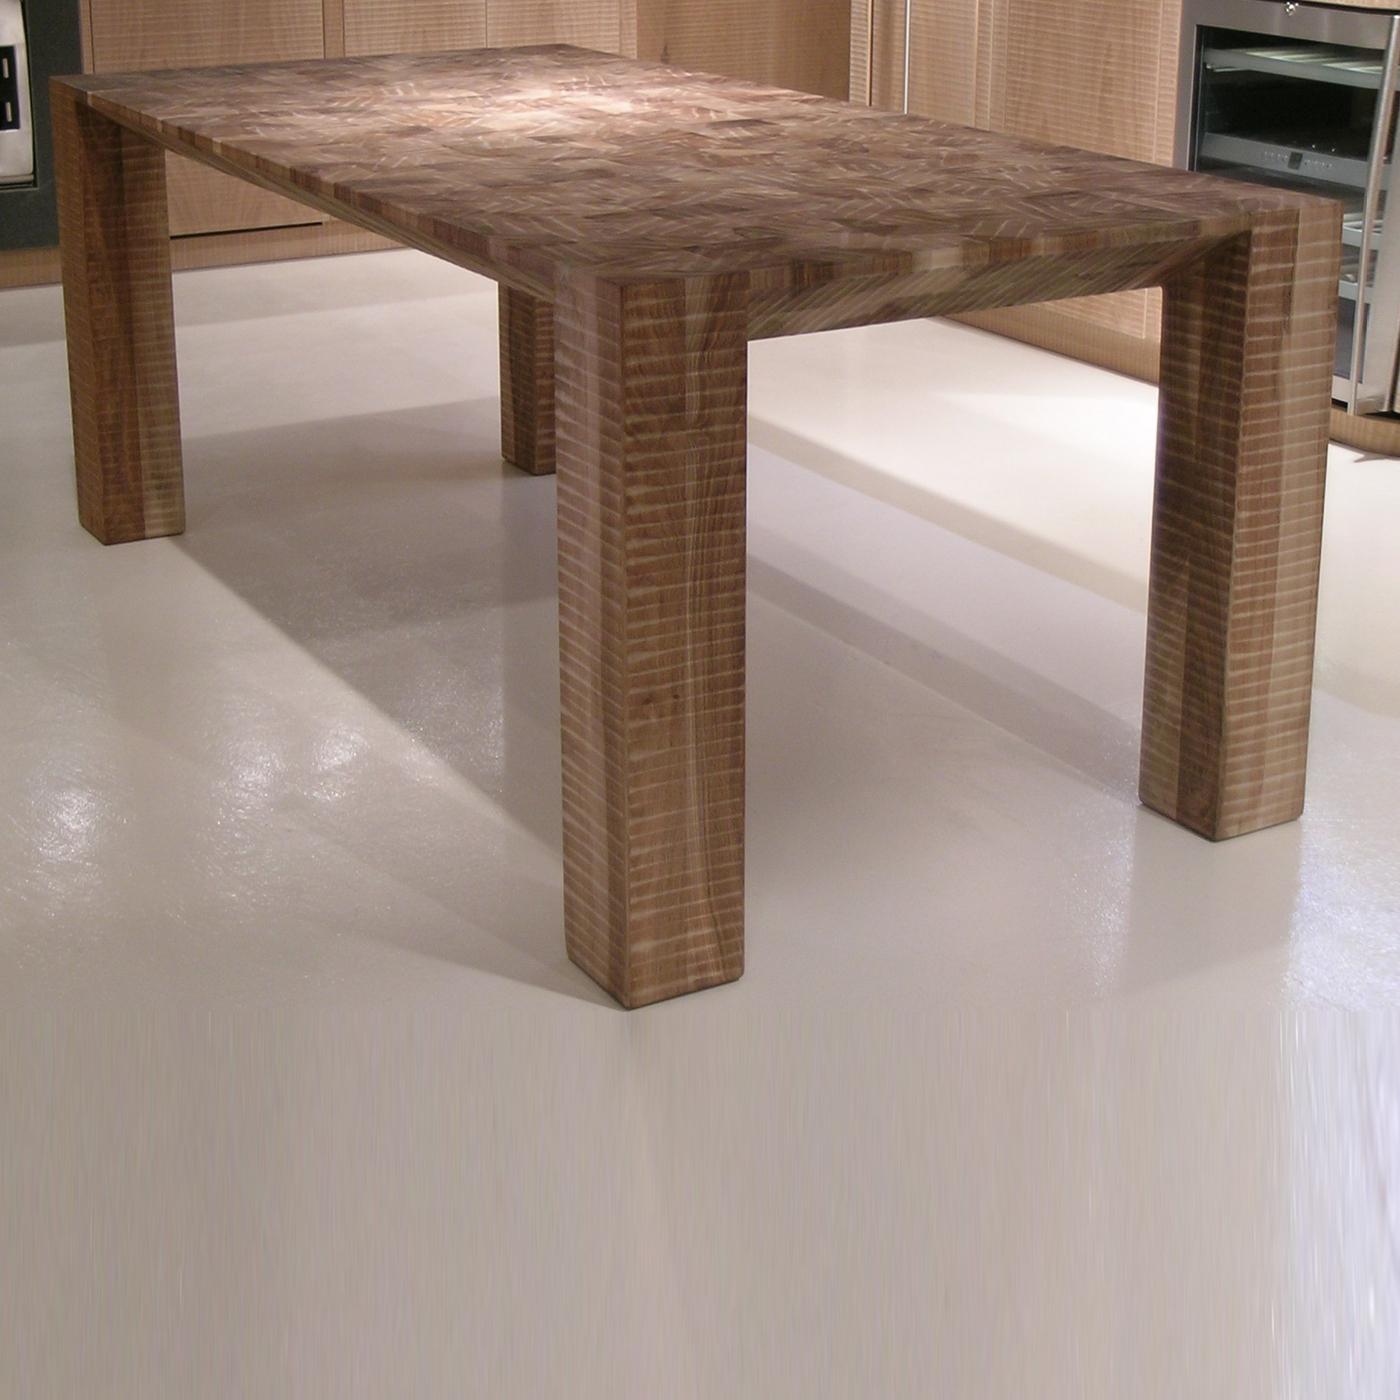 The solid Italian walnut wood of this elegant table is hand carved with gouge and plane. The result is a minimalist object made of three lines that evoke both the density and the substance of the matter they are made of.